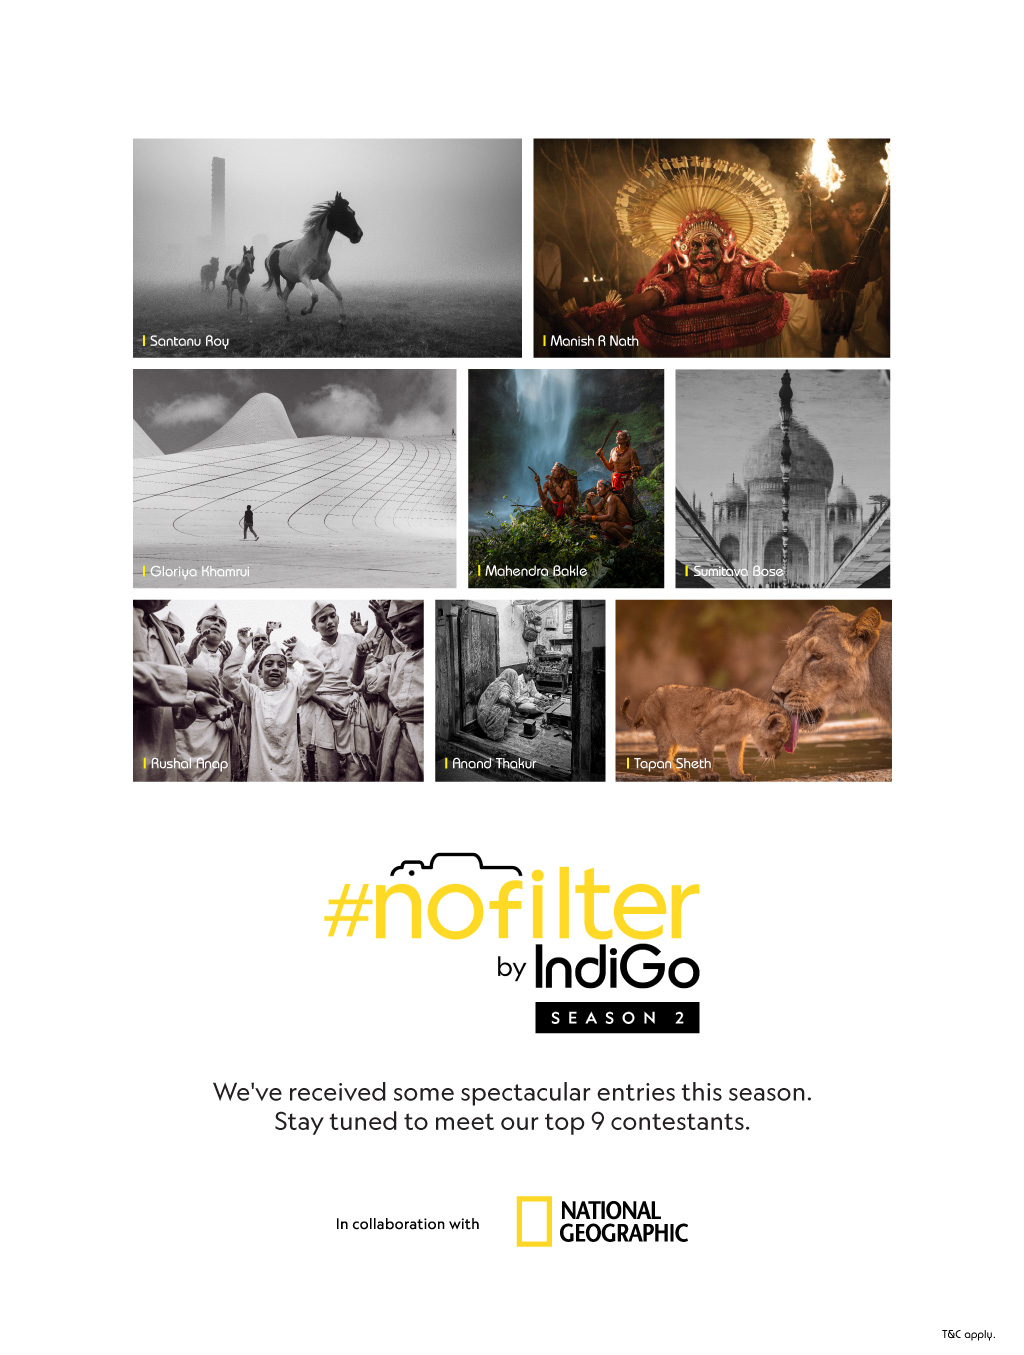 Photography Contest by IndiGo in collaboration with National Geographic